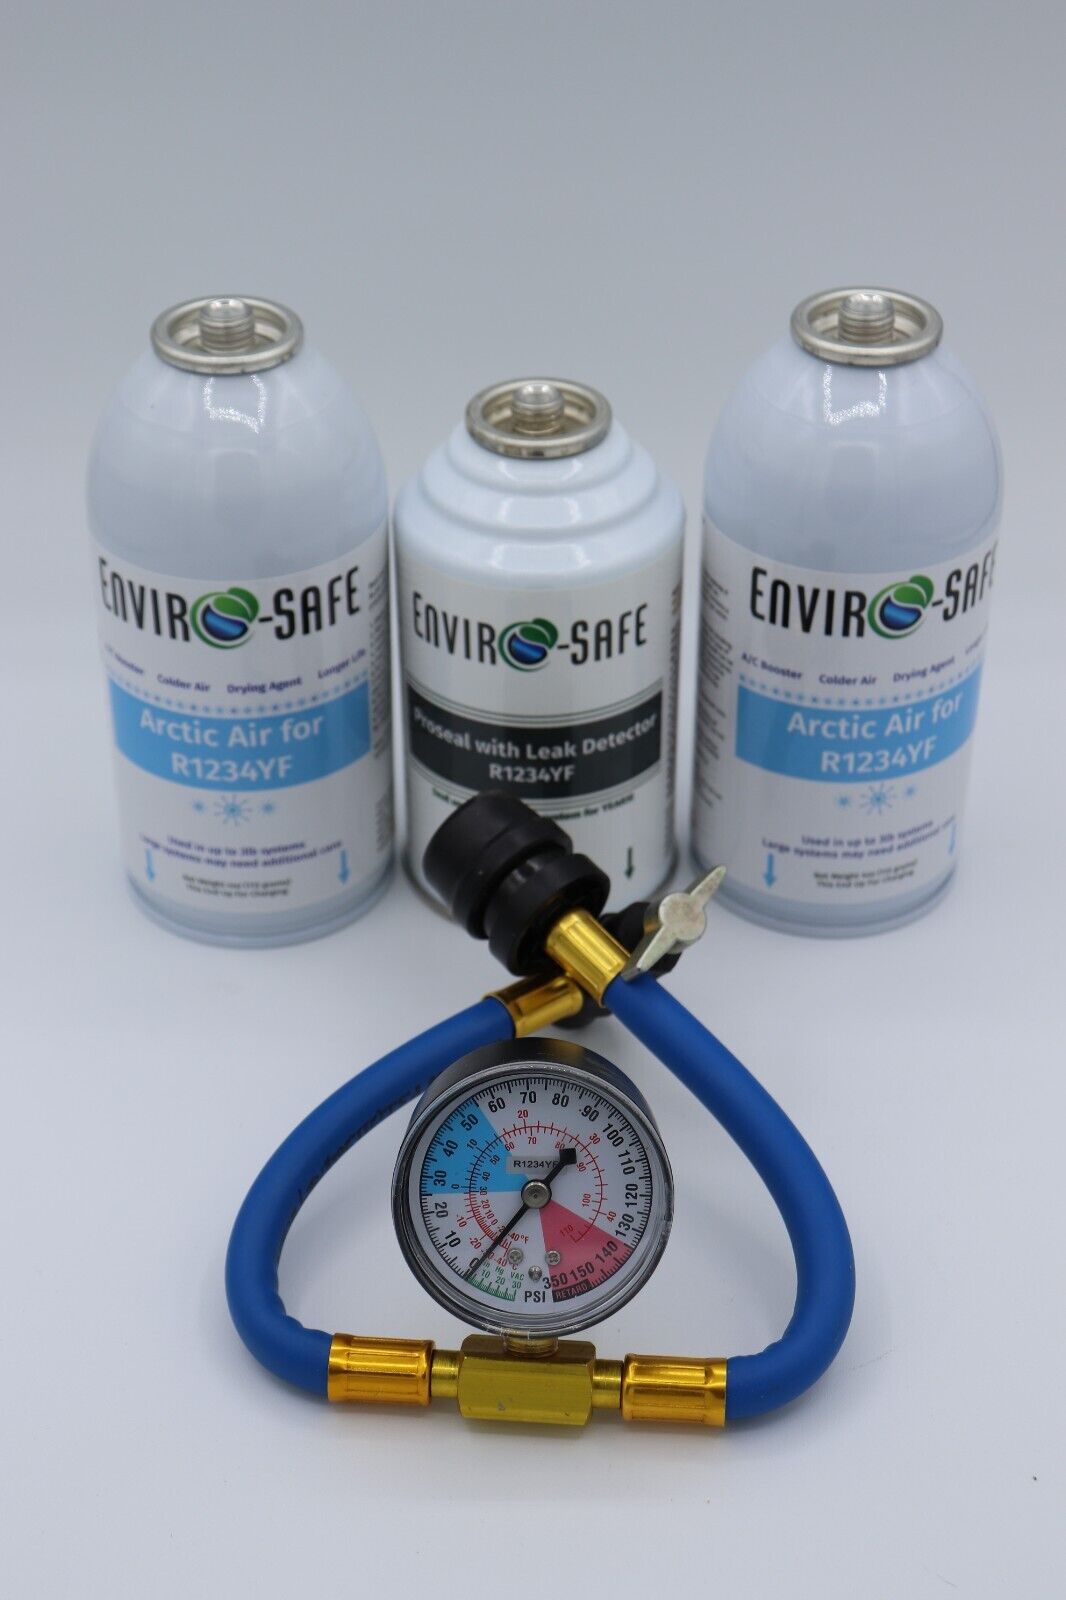 Envirosafe Arctic Air for R-1234yf with Proseal, Leak Detector, R1234 and Gauge